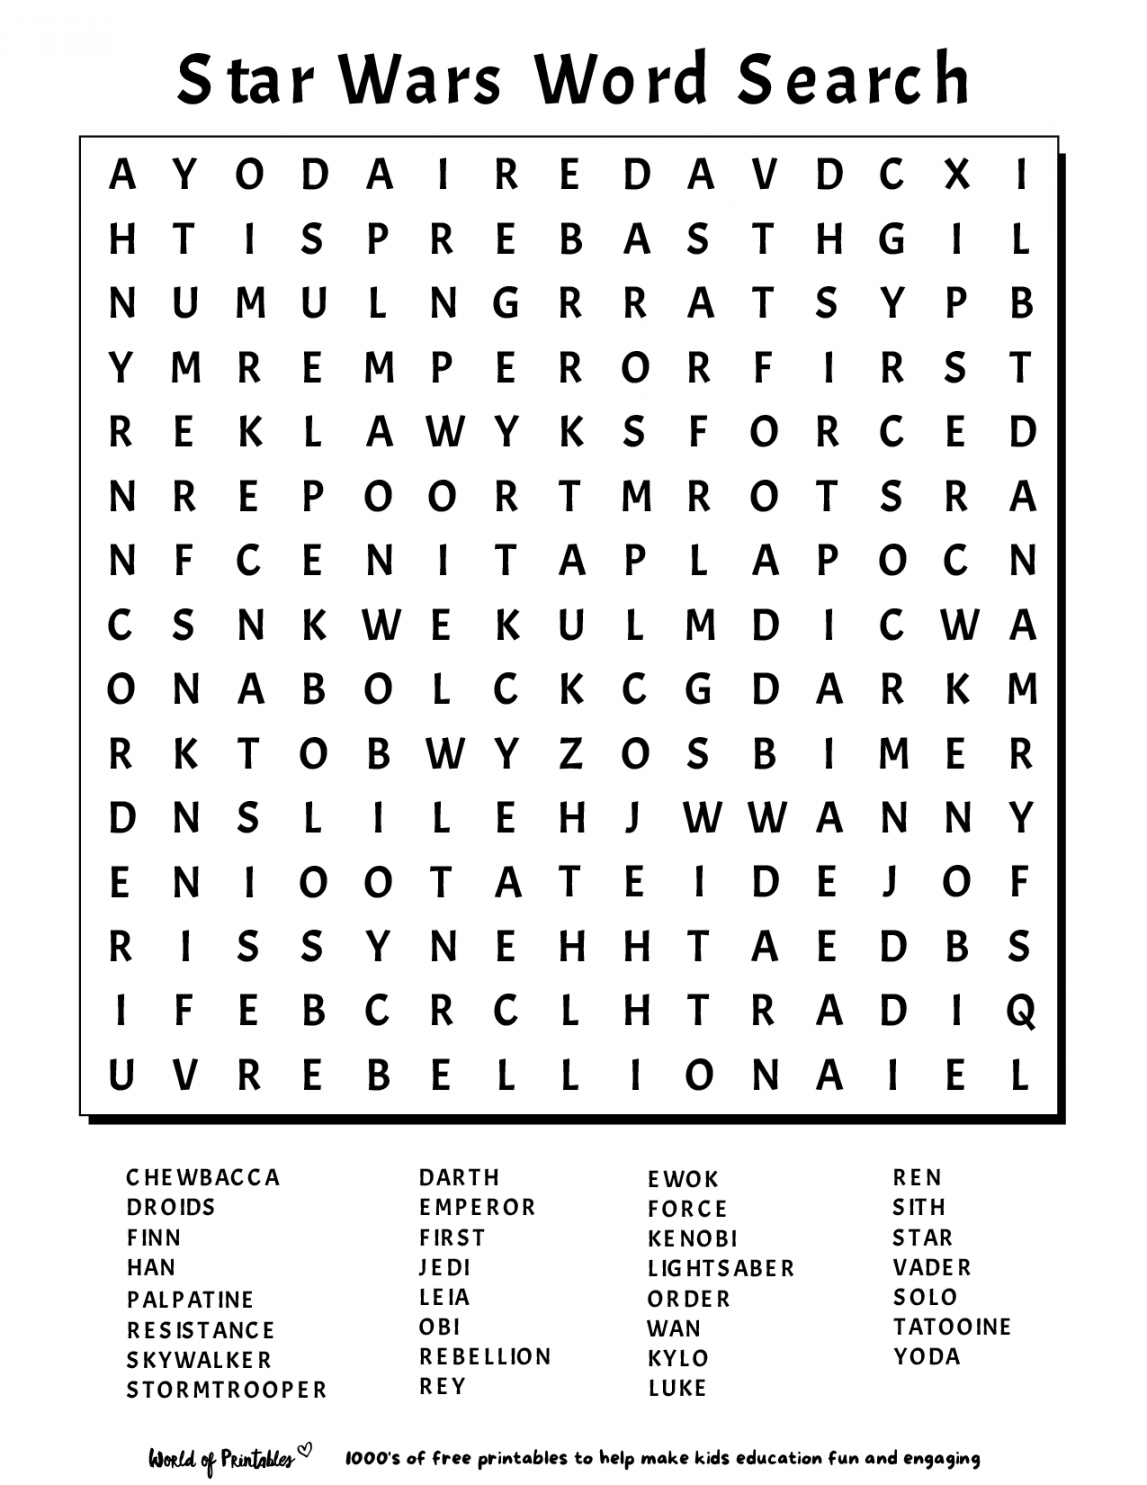 Large Print Word Searches Free Printable - Printable - Printable Word Search  World of Printables